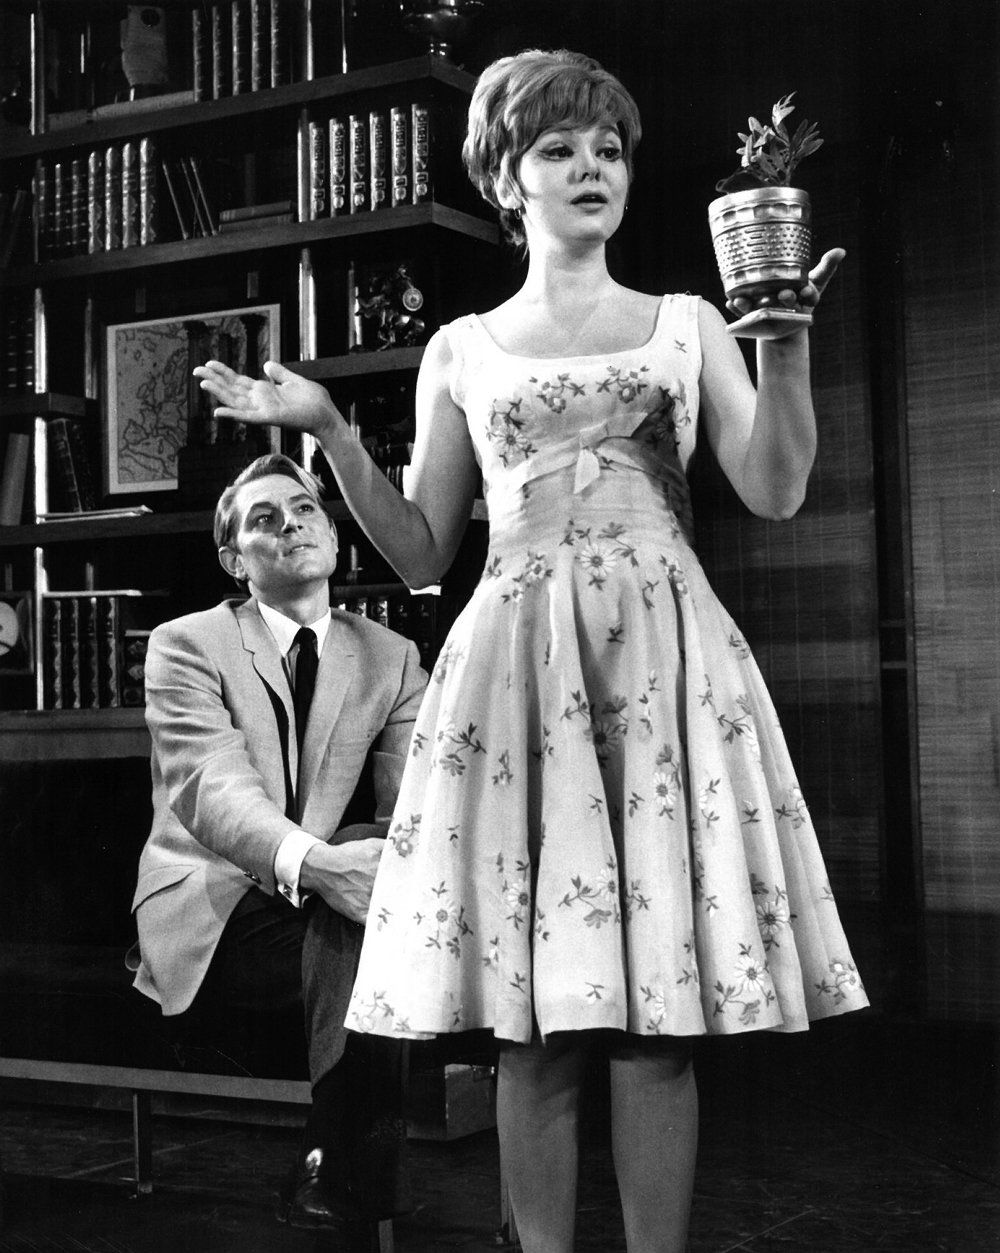 Barbara Harris holding a potted flower in the Broadway show.